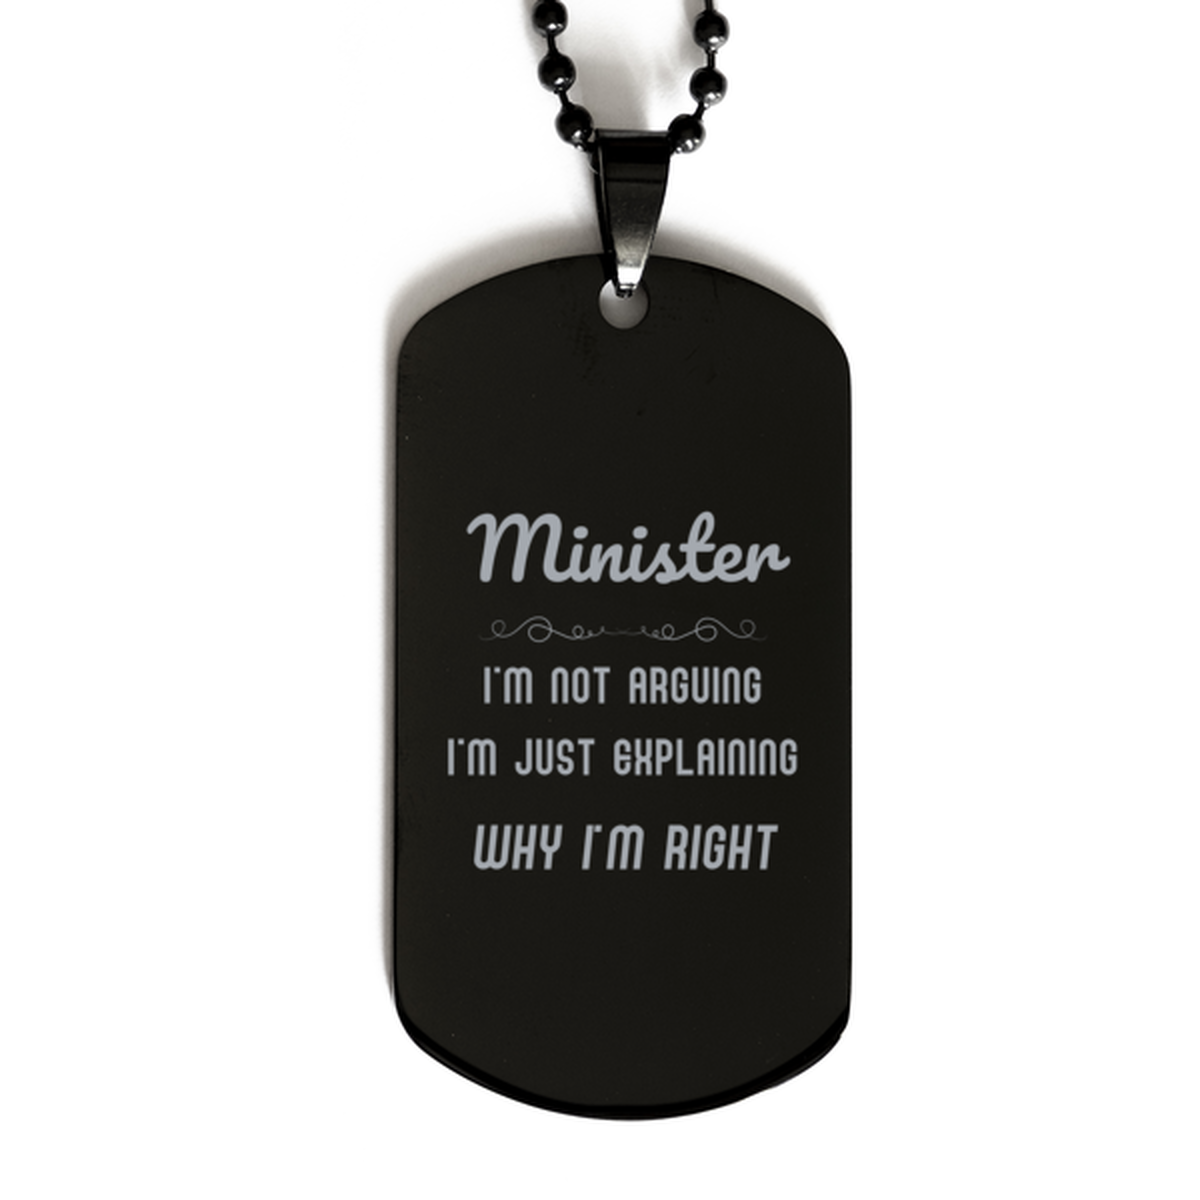 Minister I'm not Arguing. I'm Just Explaining Why I'm RIGHT Black Dog Tag, Funny Saying Quote Minister Gifts For Minister Graduation Birthday Christmas Gifts for Men Women Coworker